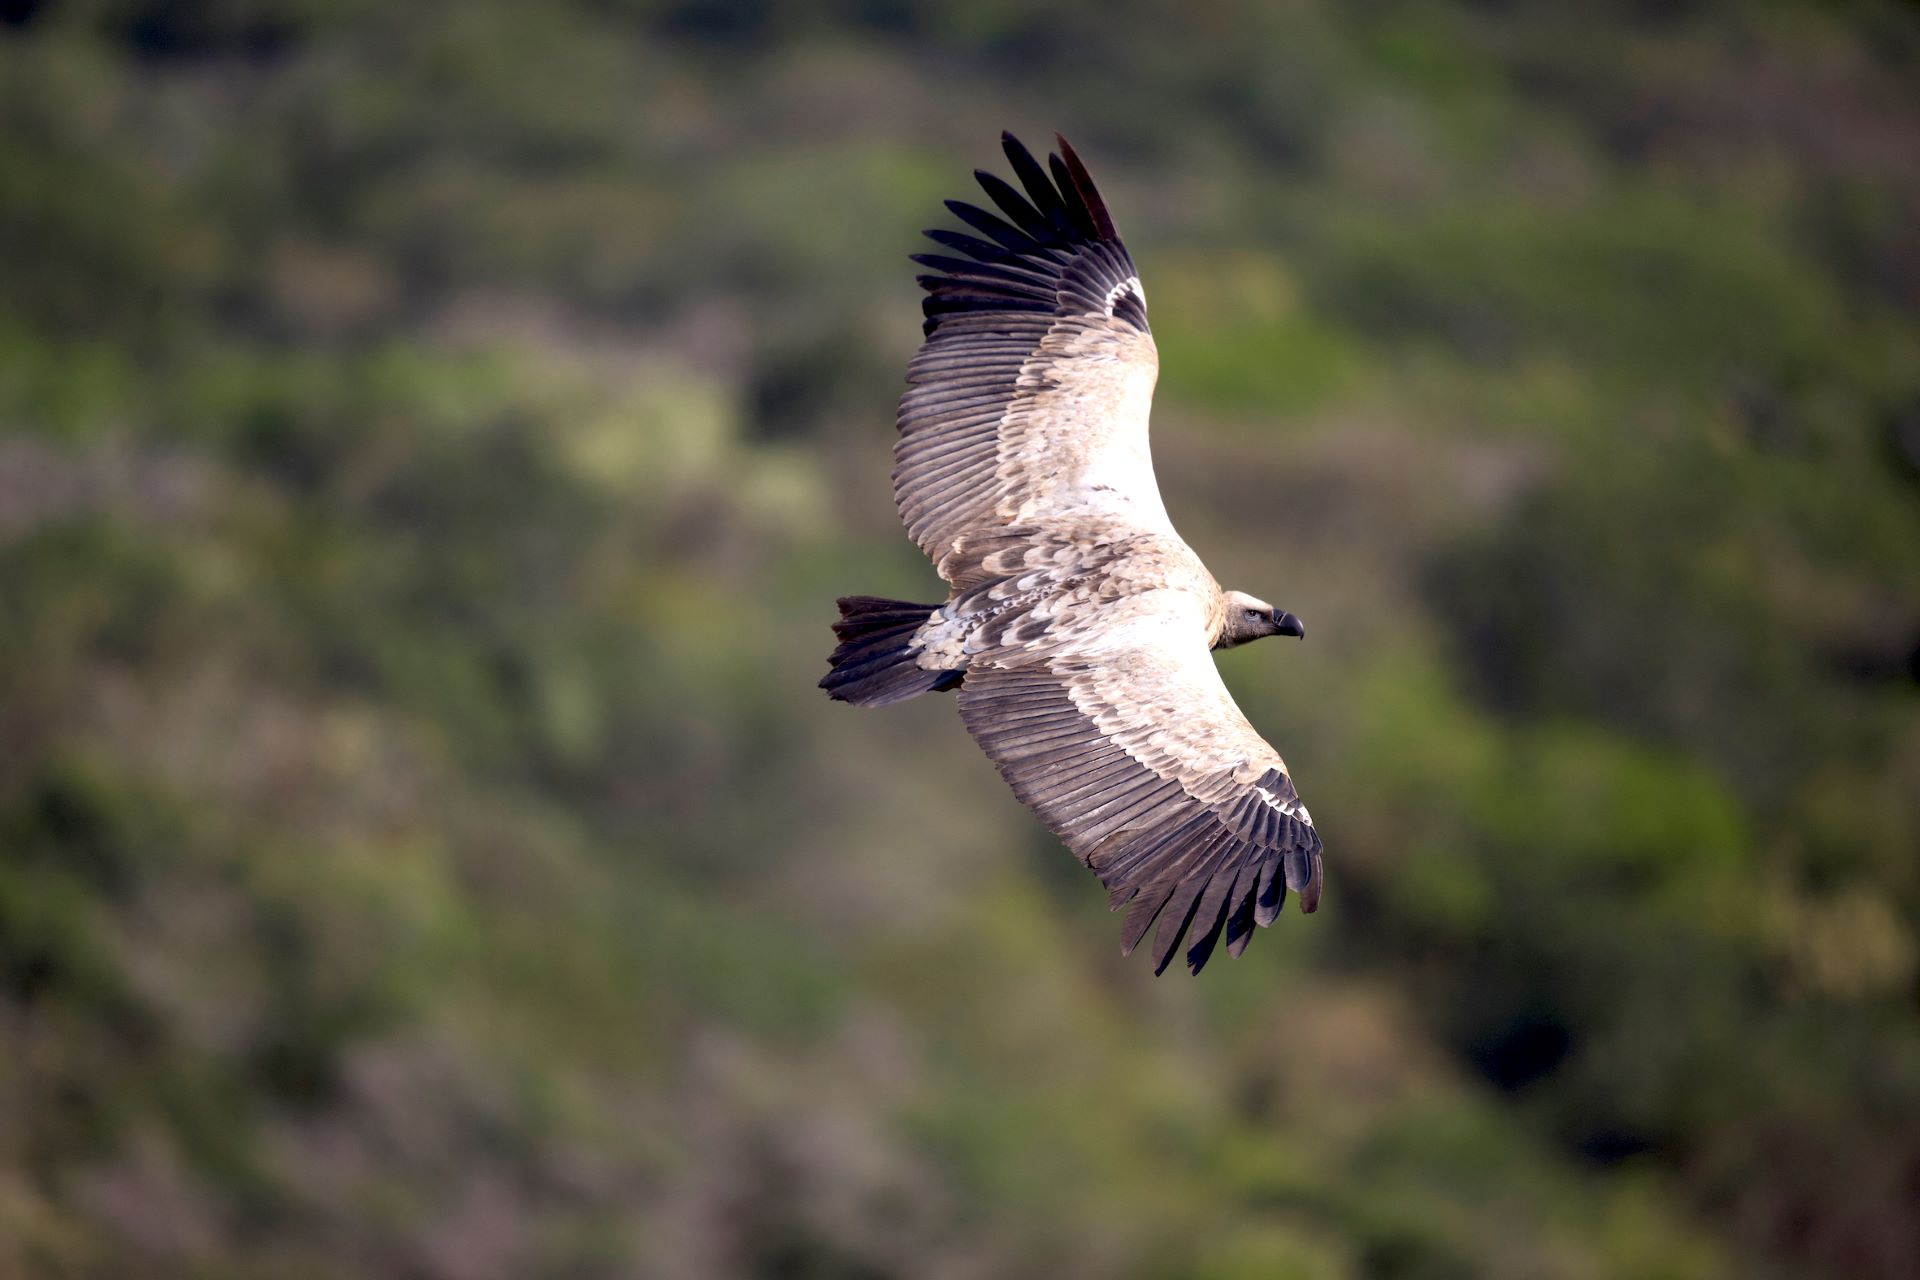 Soaring Into Action For International Vulture Awareness Day